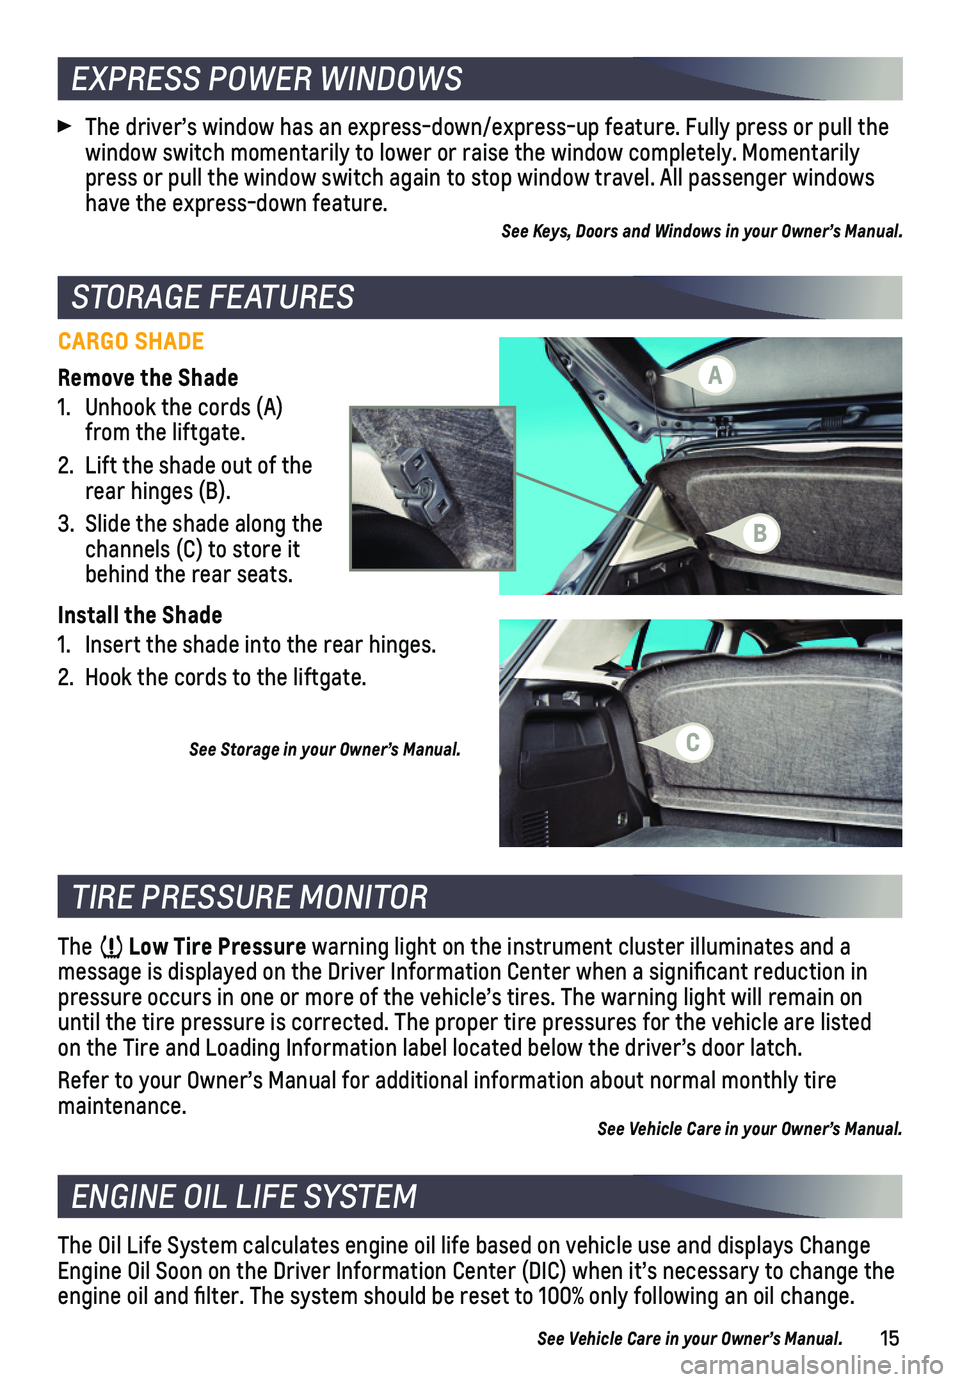 CHEVROLET TRAX 2019  Get To Know Guide 15
STORAGE FEATURES 
CARGO SHADE
Remove the Shade
1. Unhook the cords (A) from the liftgate.
2. Lift the shade out of the rear hinges (B).
3. Slide the shade along the channels (C) to store it behind 